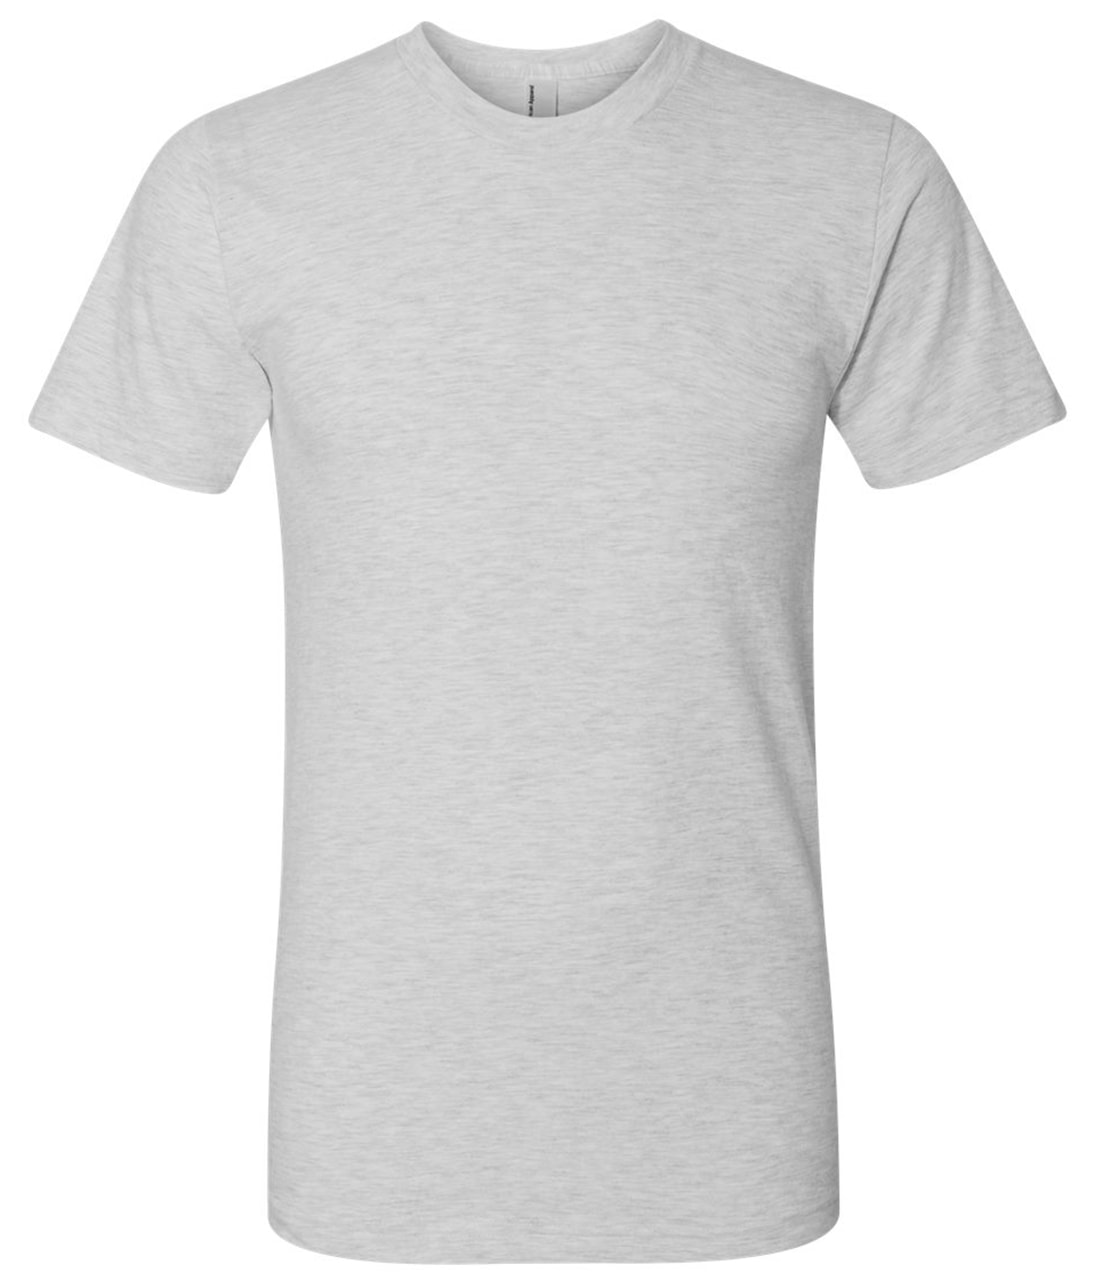 Picture of American Apparel Unisex Fine Jersey Short Sleeve T-Shirt